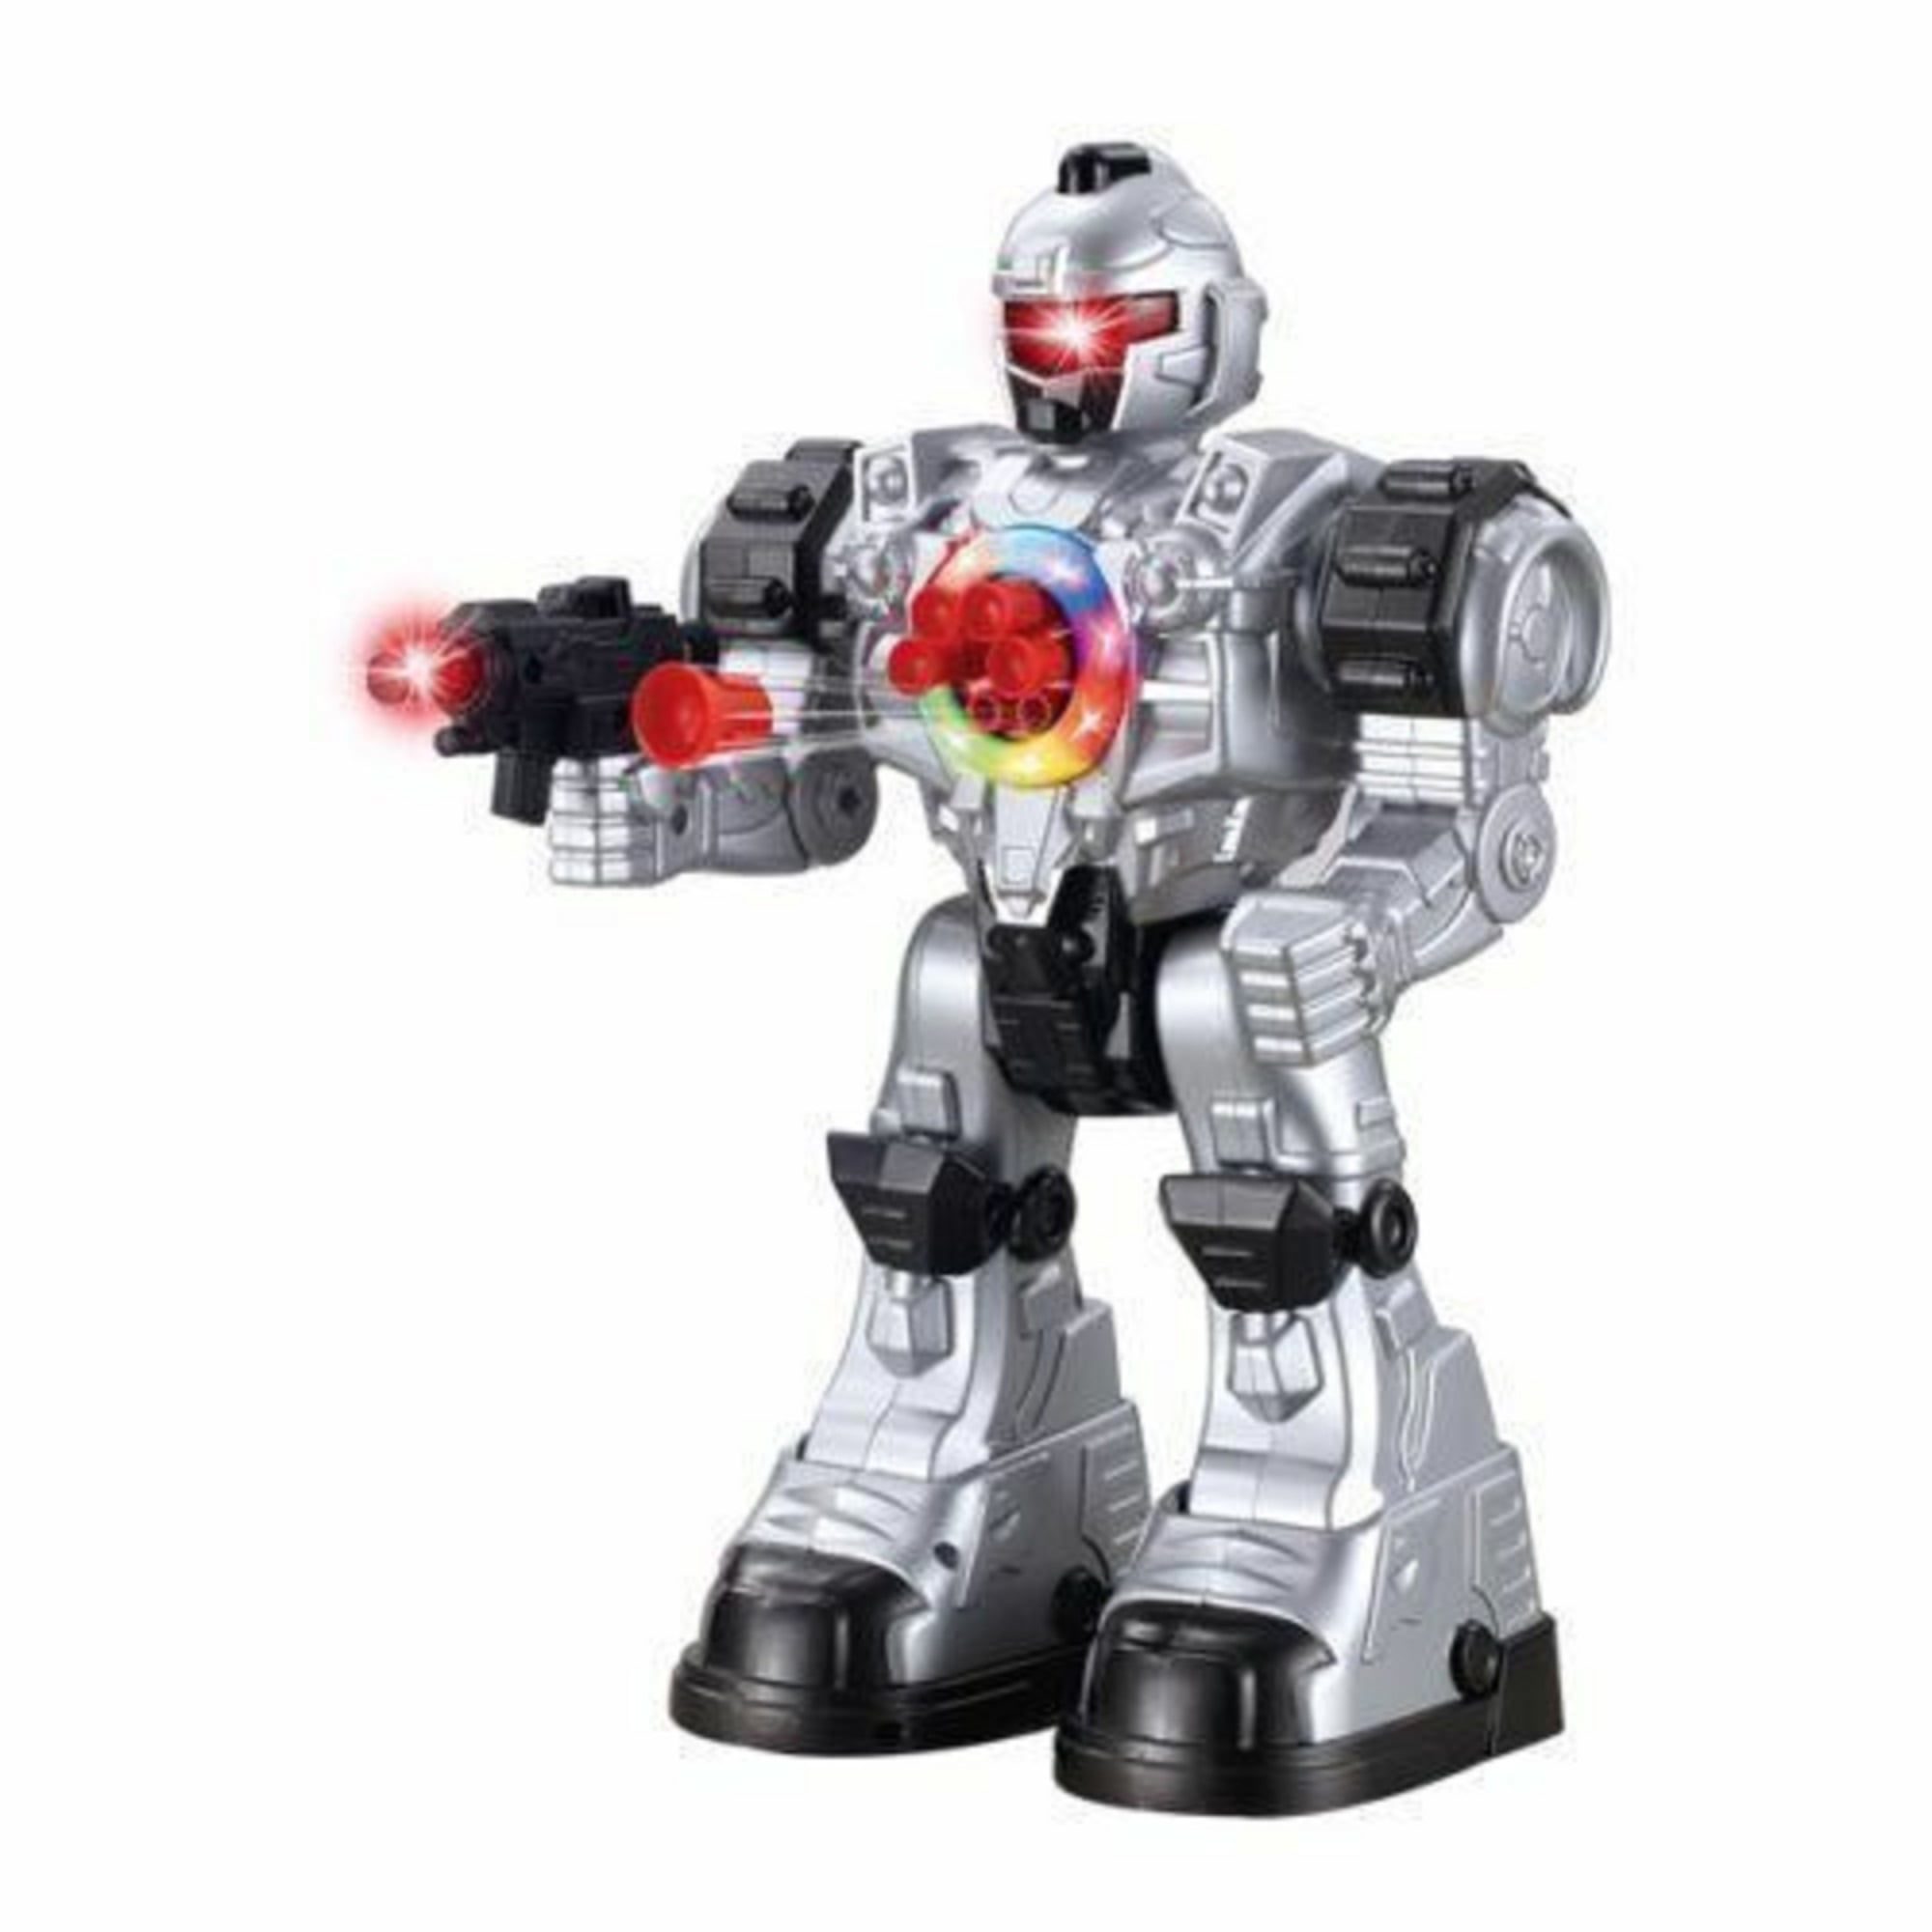 Details about   RC Robot Toy for Kids Smart Intelligent Programmable Remote Control Gray